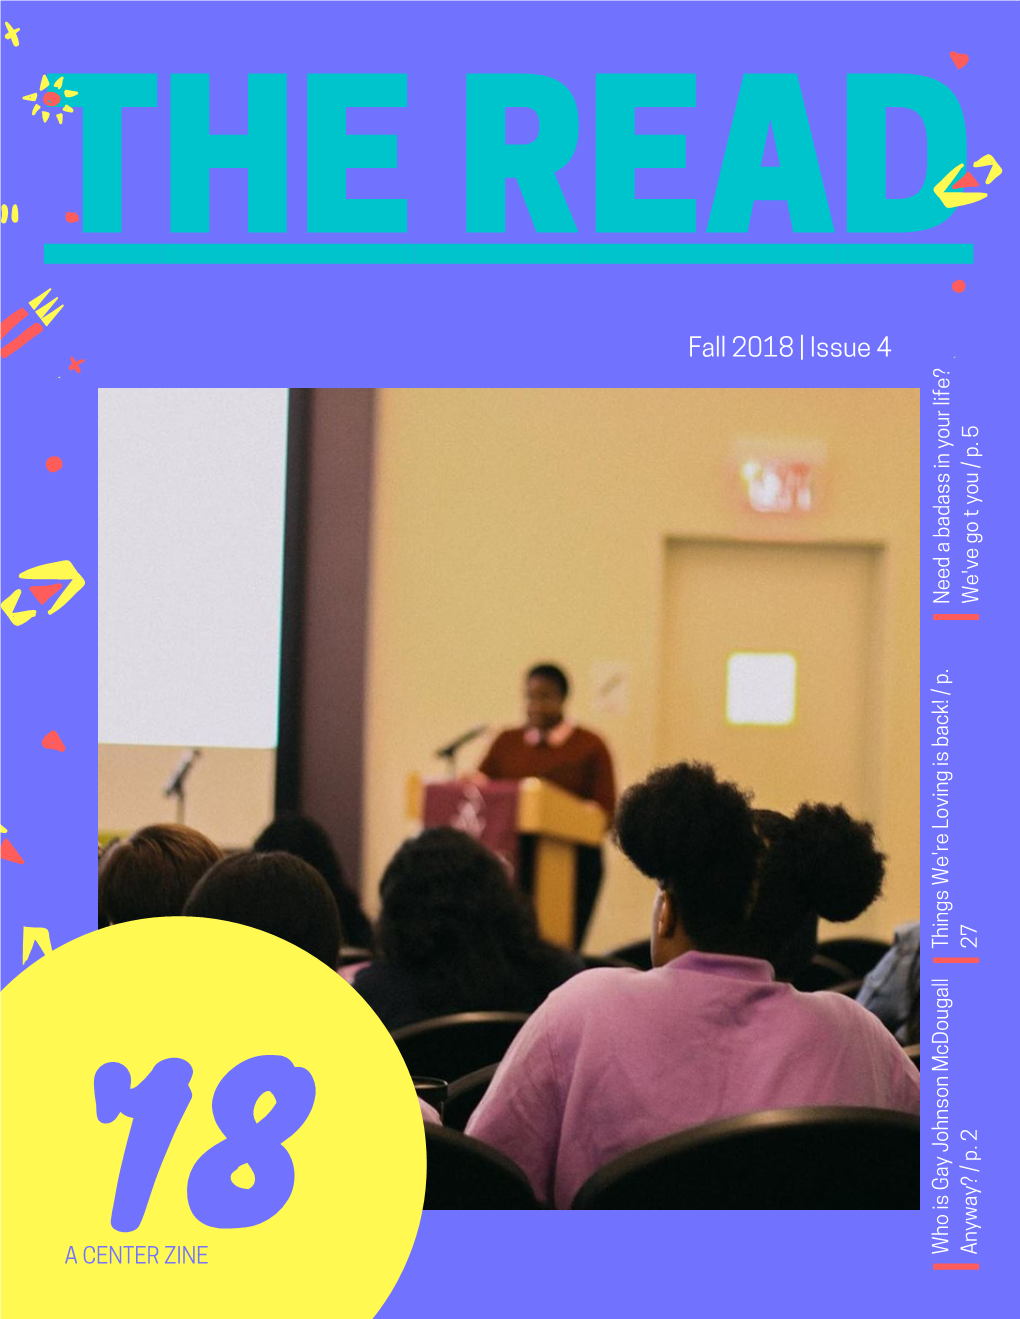 A Center Zine, We Are Back! Moving Forward the Read Will Be Completely Digital Going Forward! Interested in Contributing? Email Diversity@Agnesscott.Edu